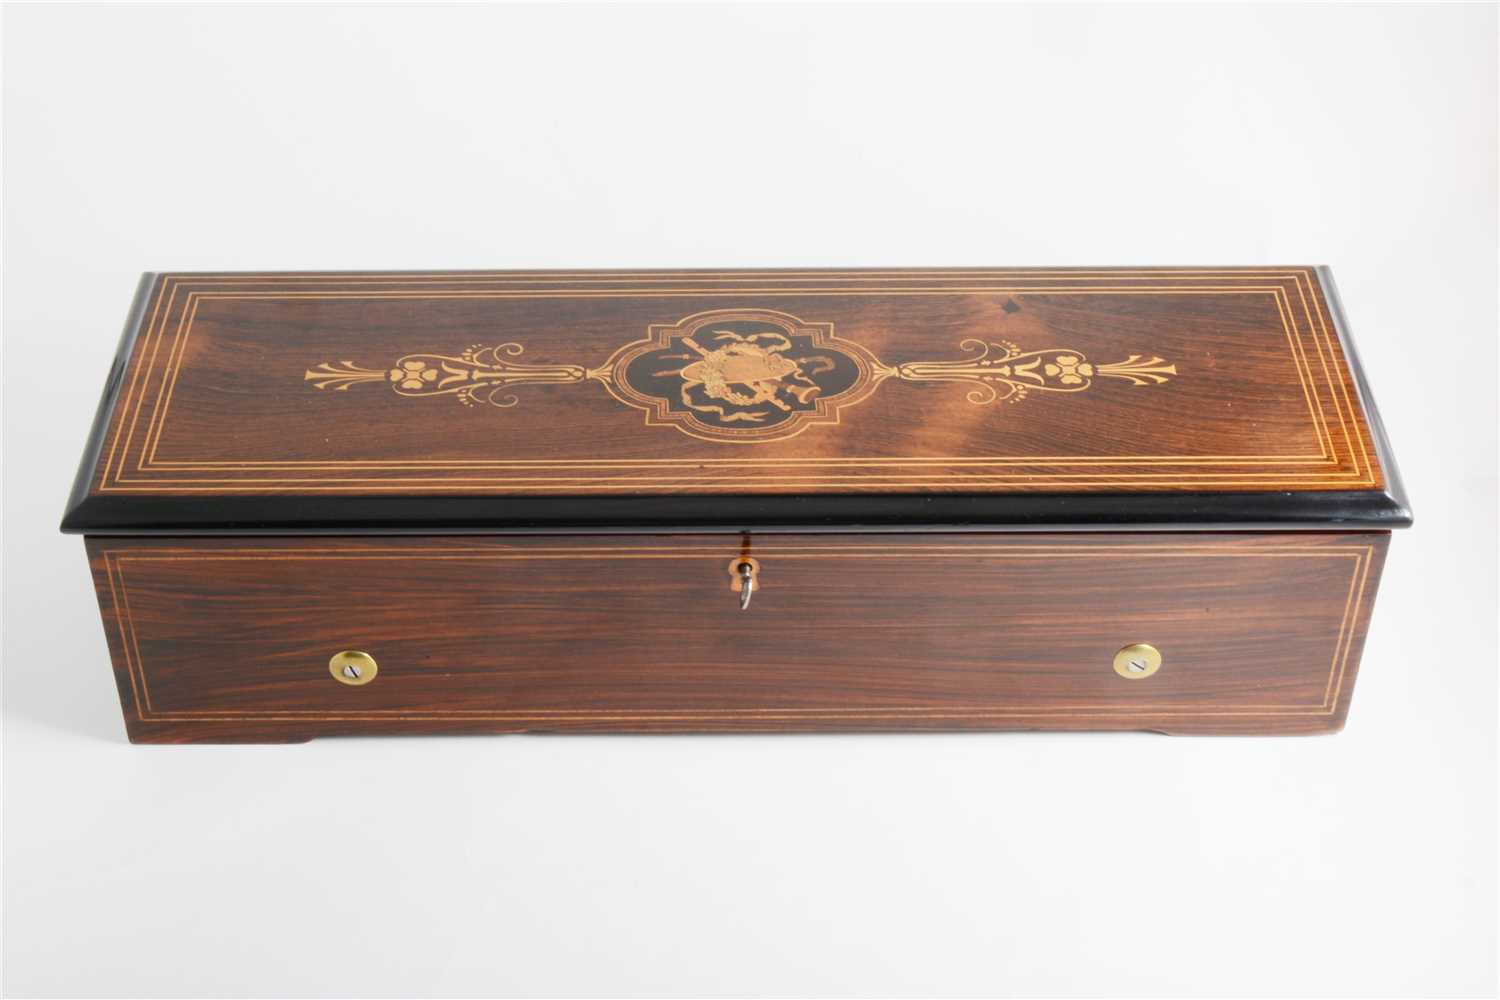 Lot 90 - Swiss rosewood and simulated rosewood musical box by Nicole Freres, No. 39432, 1860's